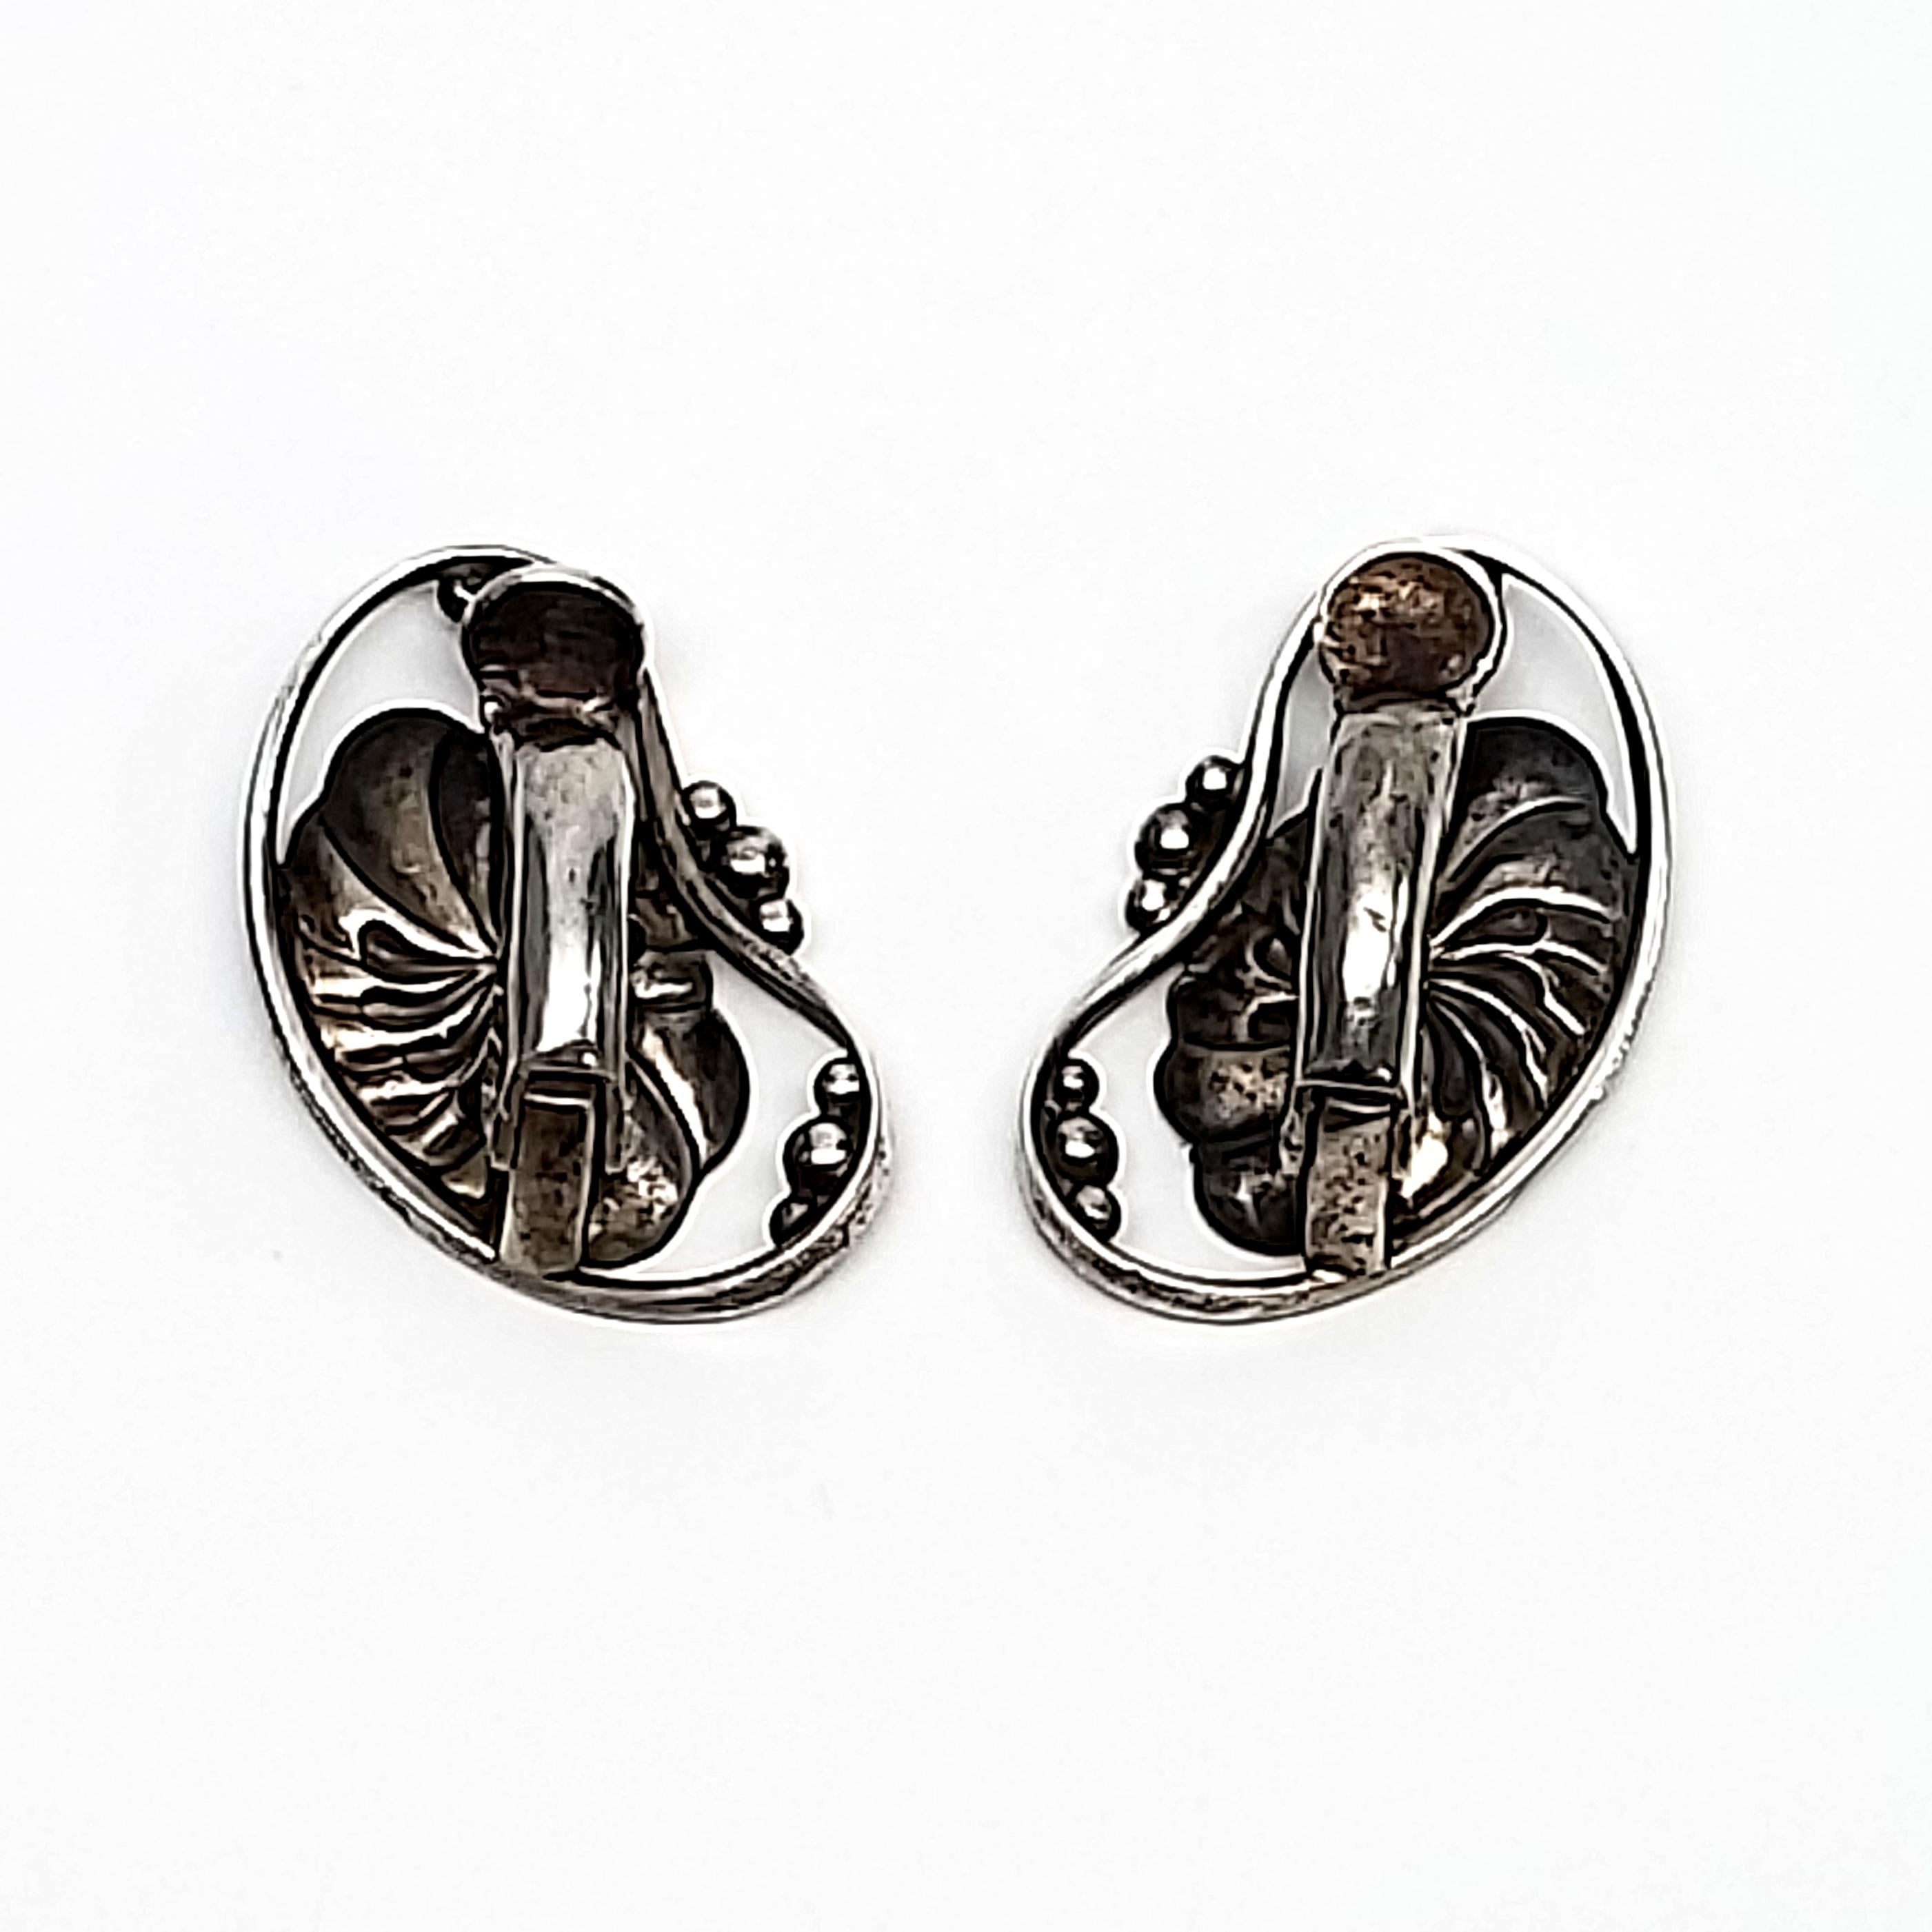 Vintage Georg Jensen sterling silver #52 Flower Bean clip-on earrings, circa 1950s.

These beautiful bean shaped earrings feature a flower and small ball accents. Originally launched in the 1950s and continues to be a classic today. Clip-on